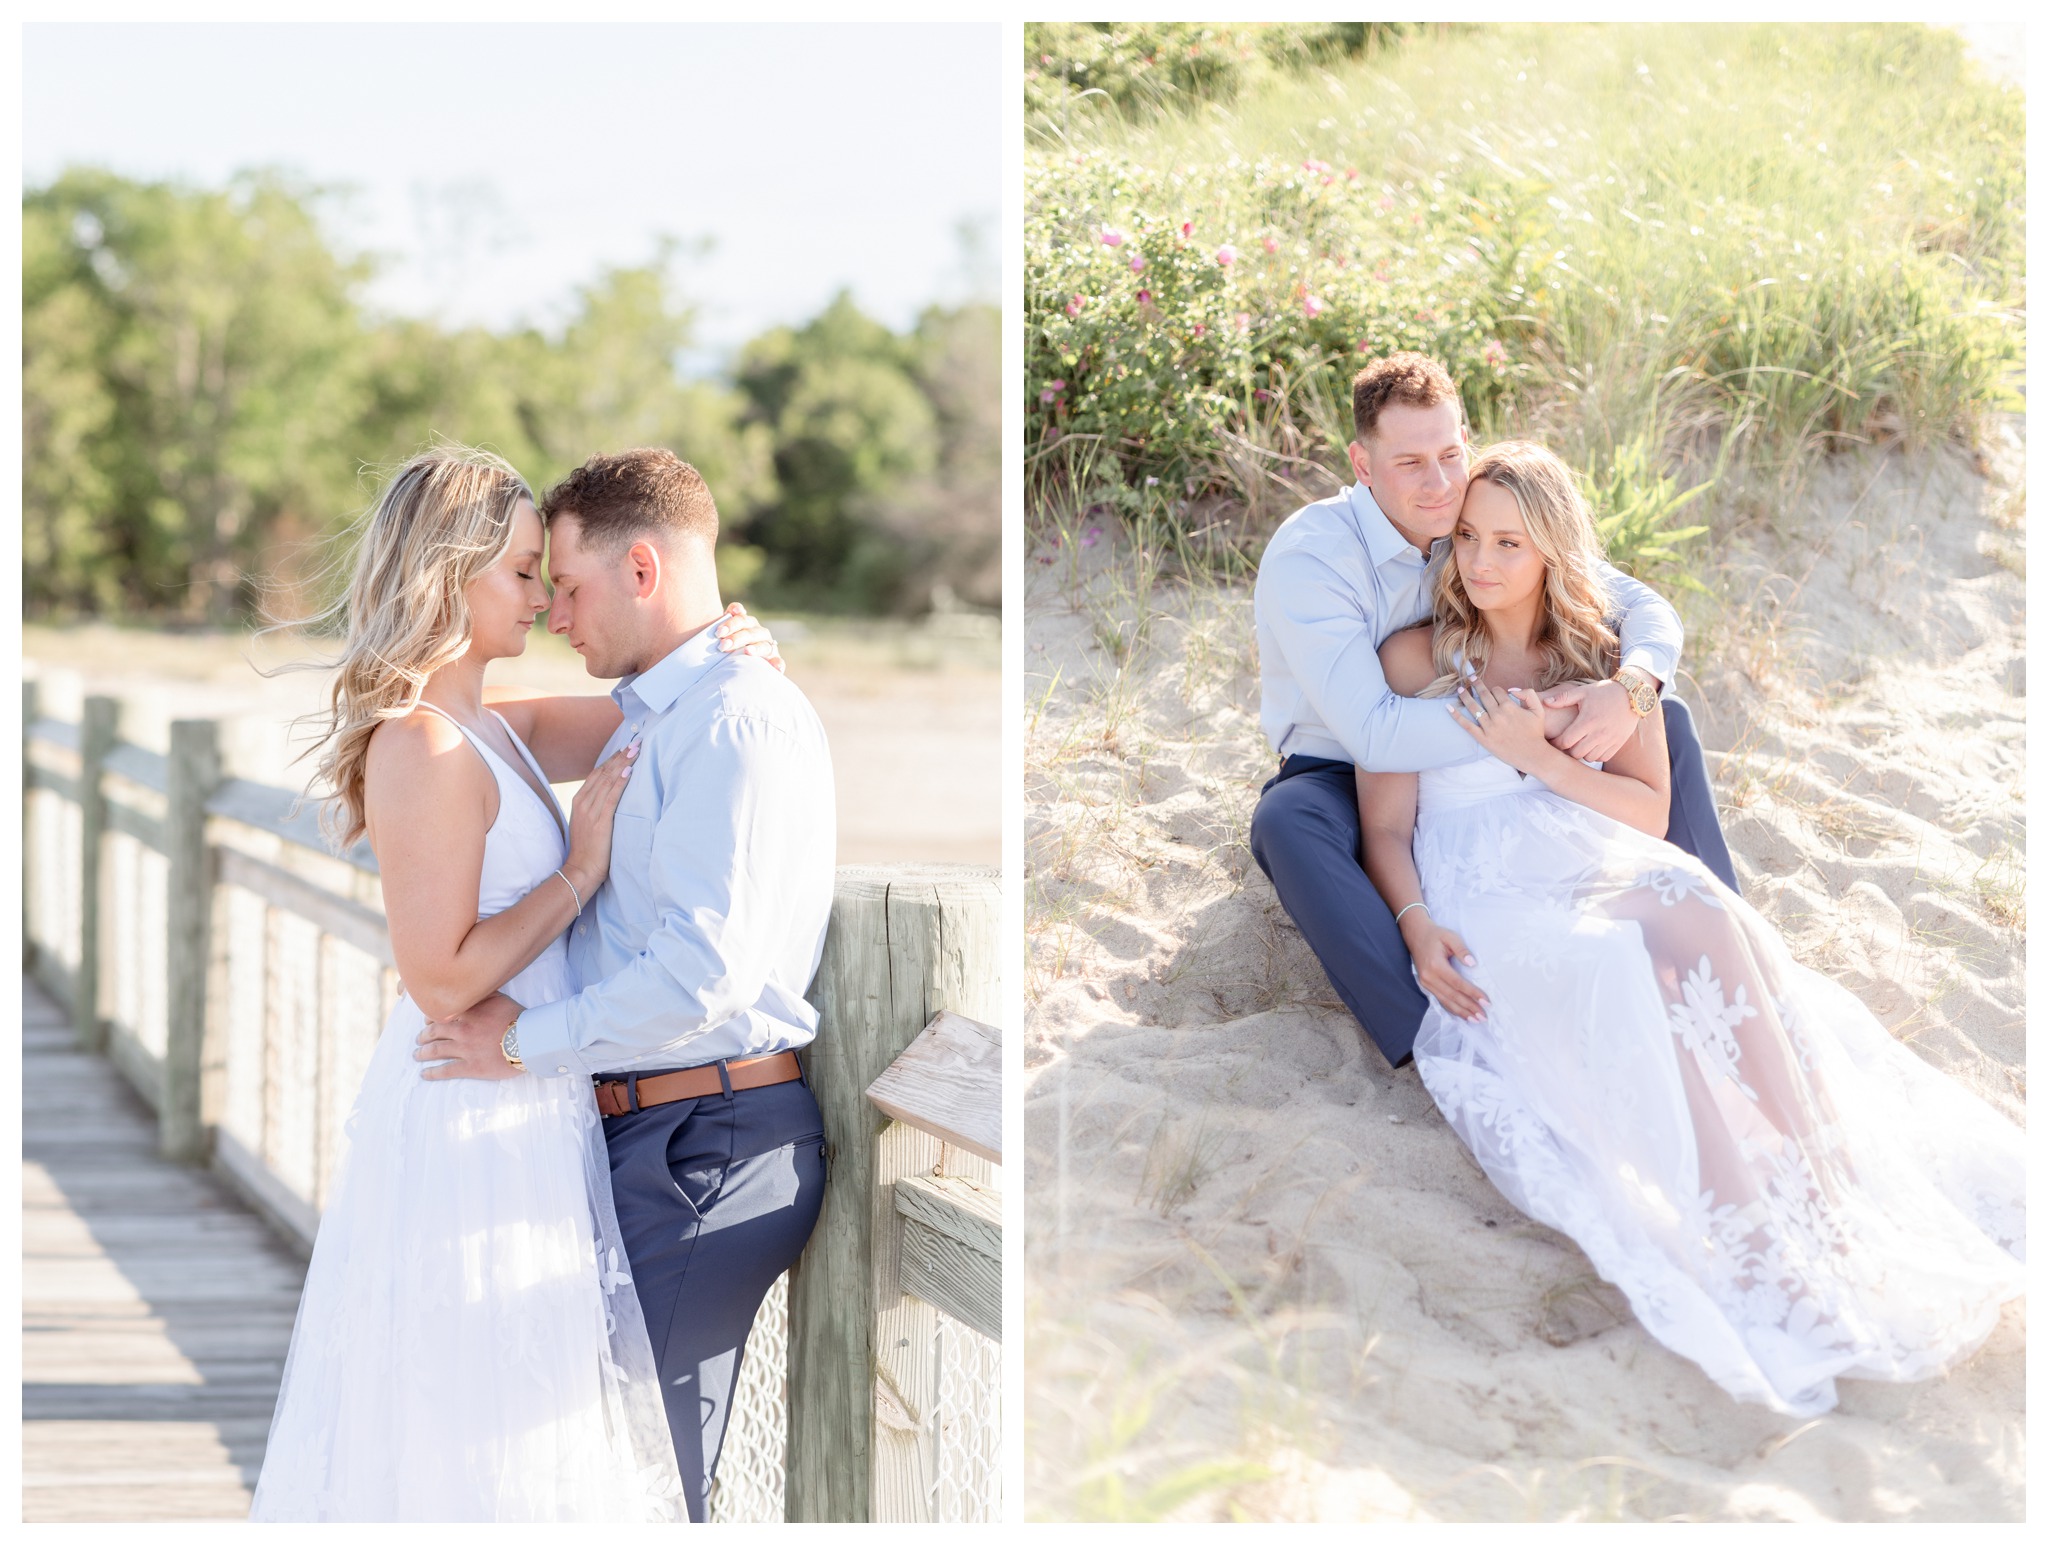 walnut beach engagement session in milford ct at silver sands beach in the dunes